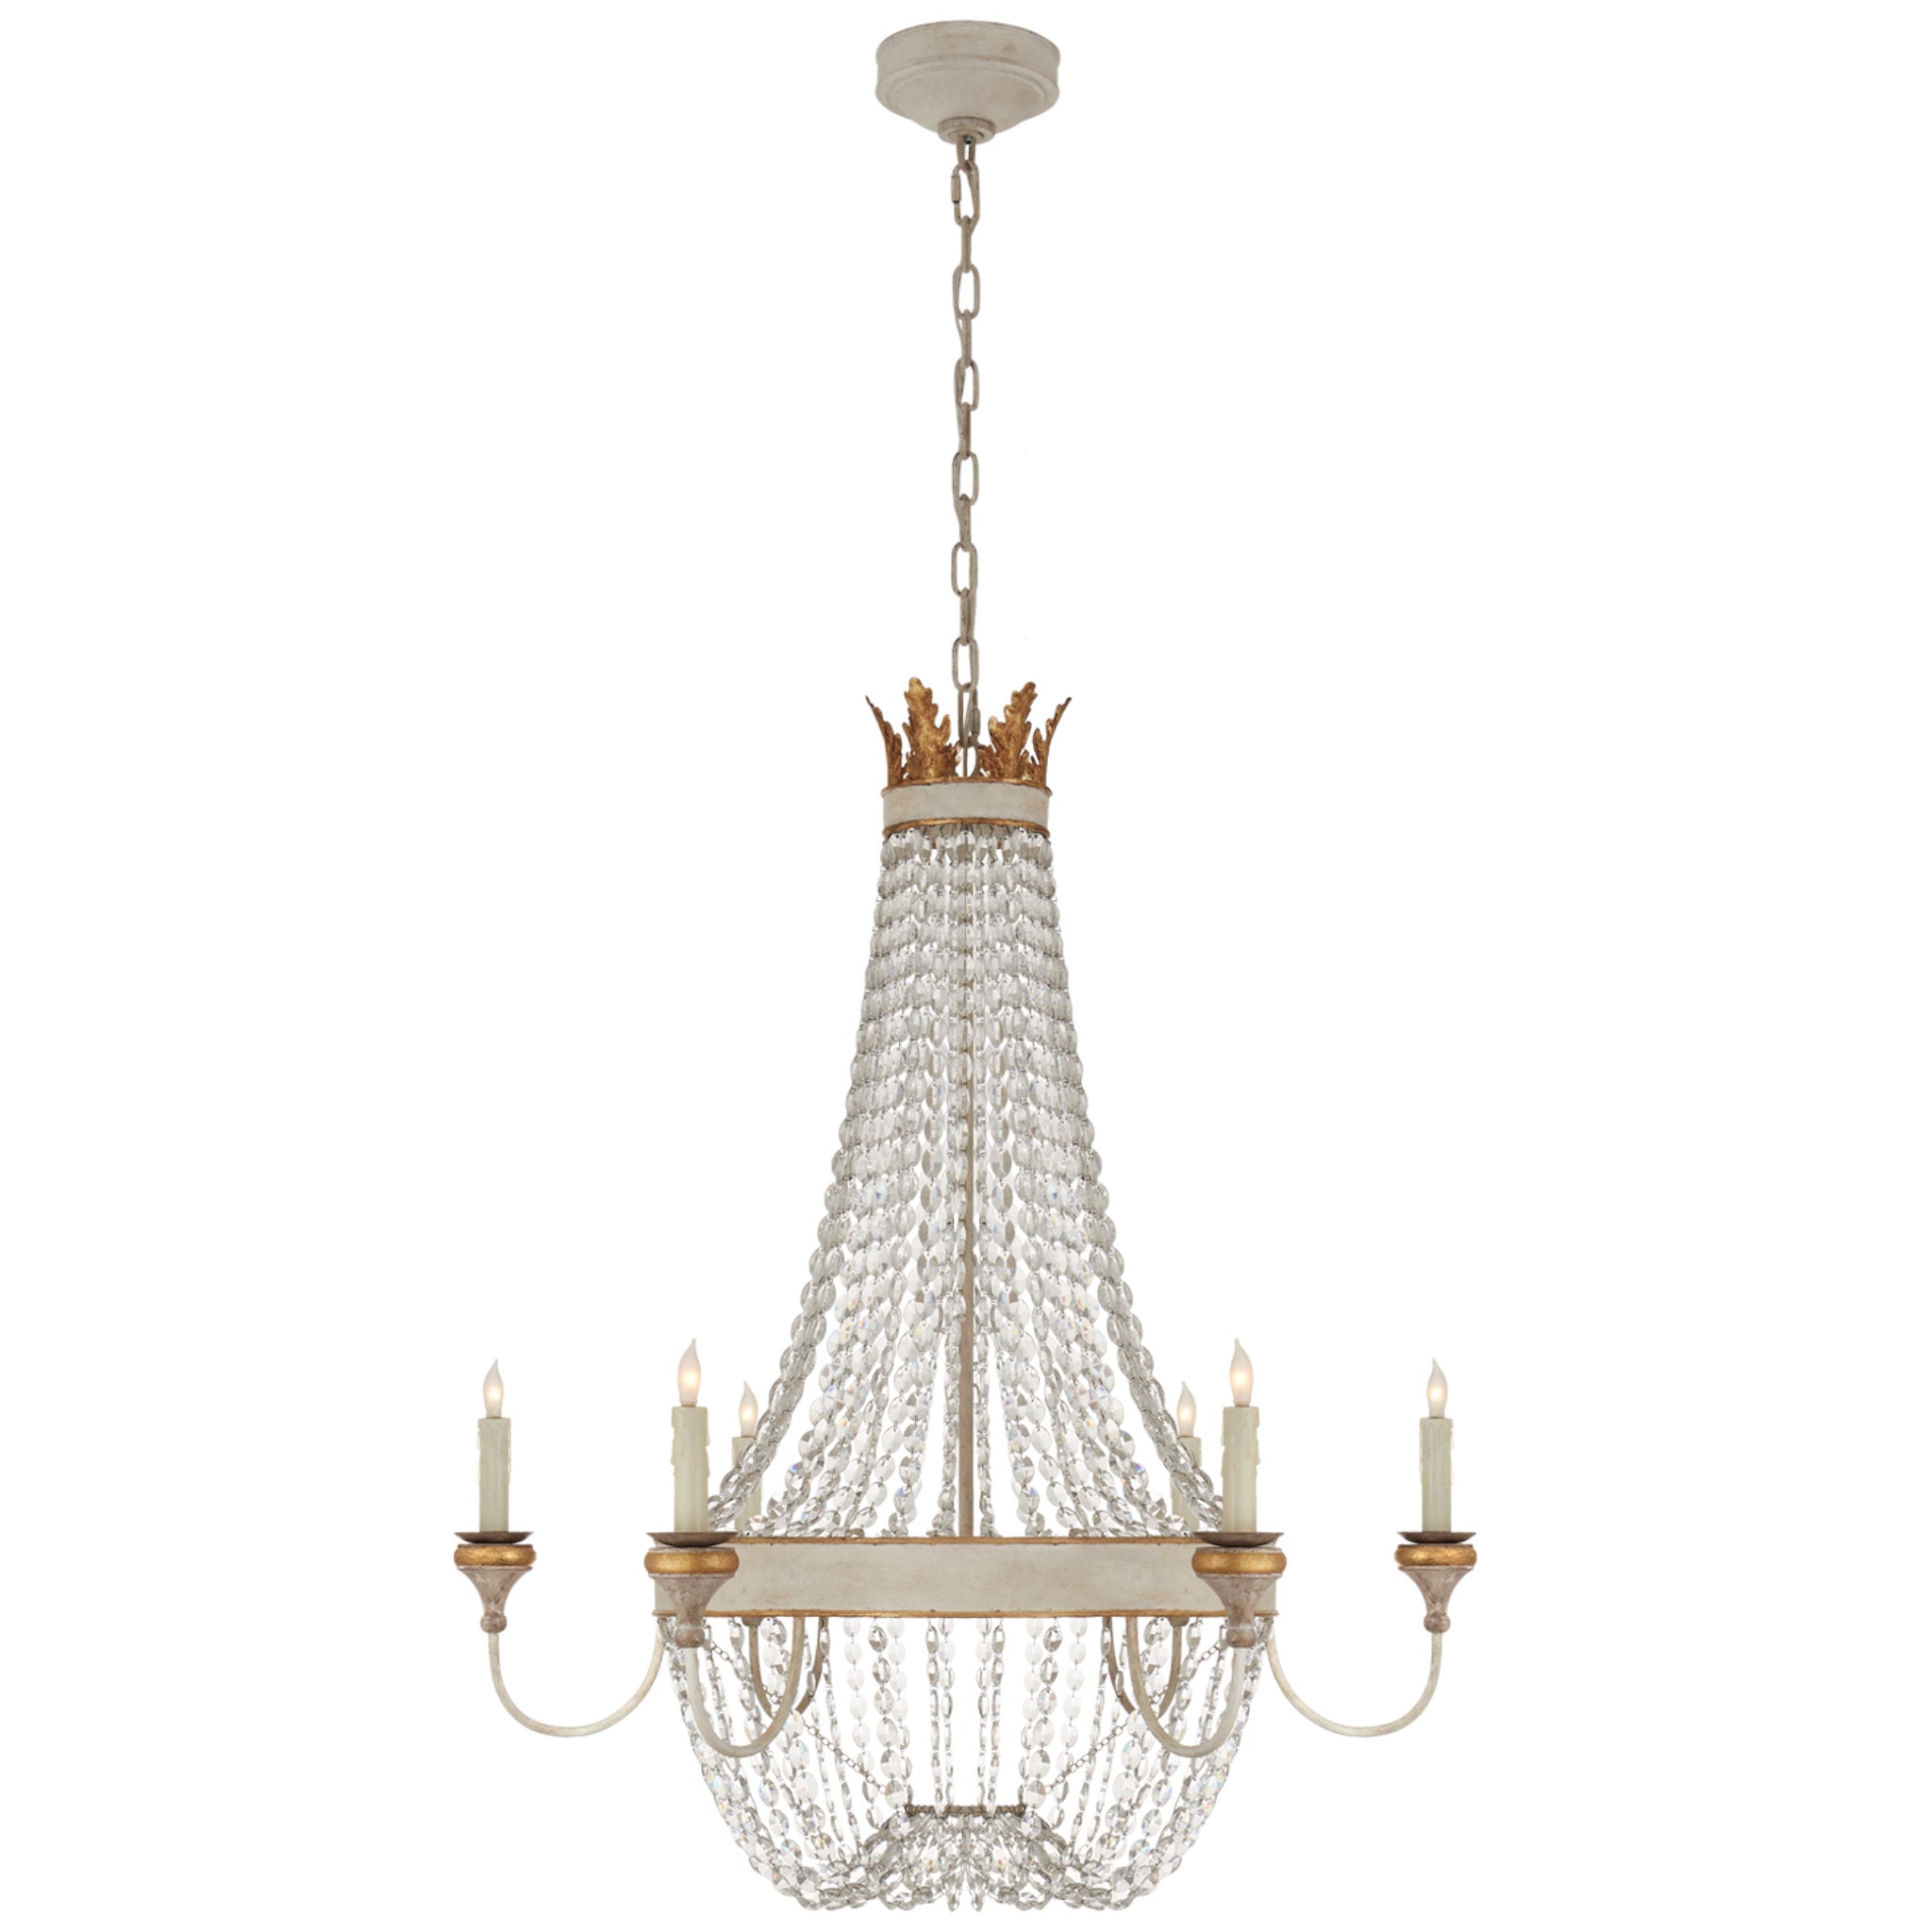 Julie Neill Entellina Chandelier in Vintage White and Gild with Crystal